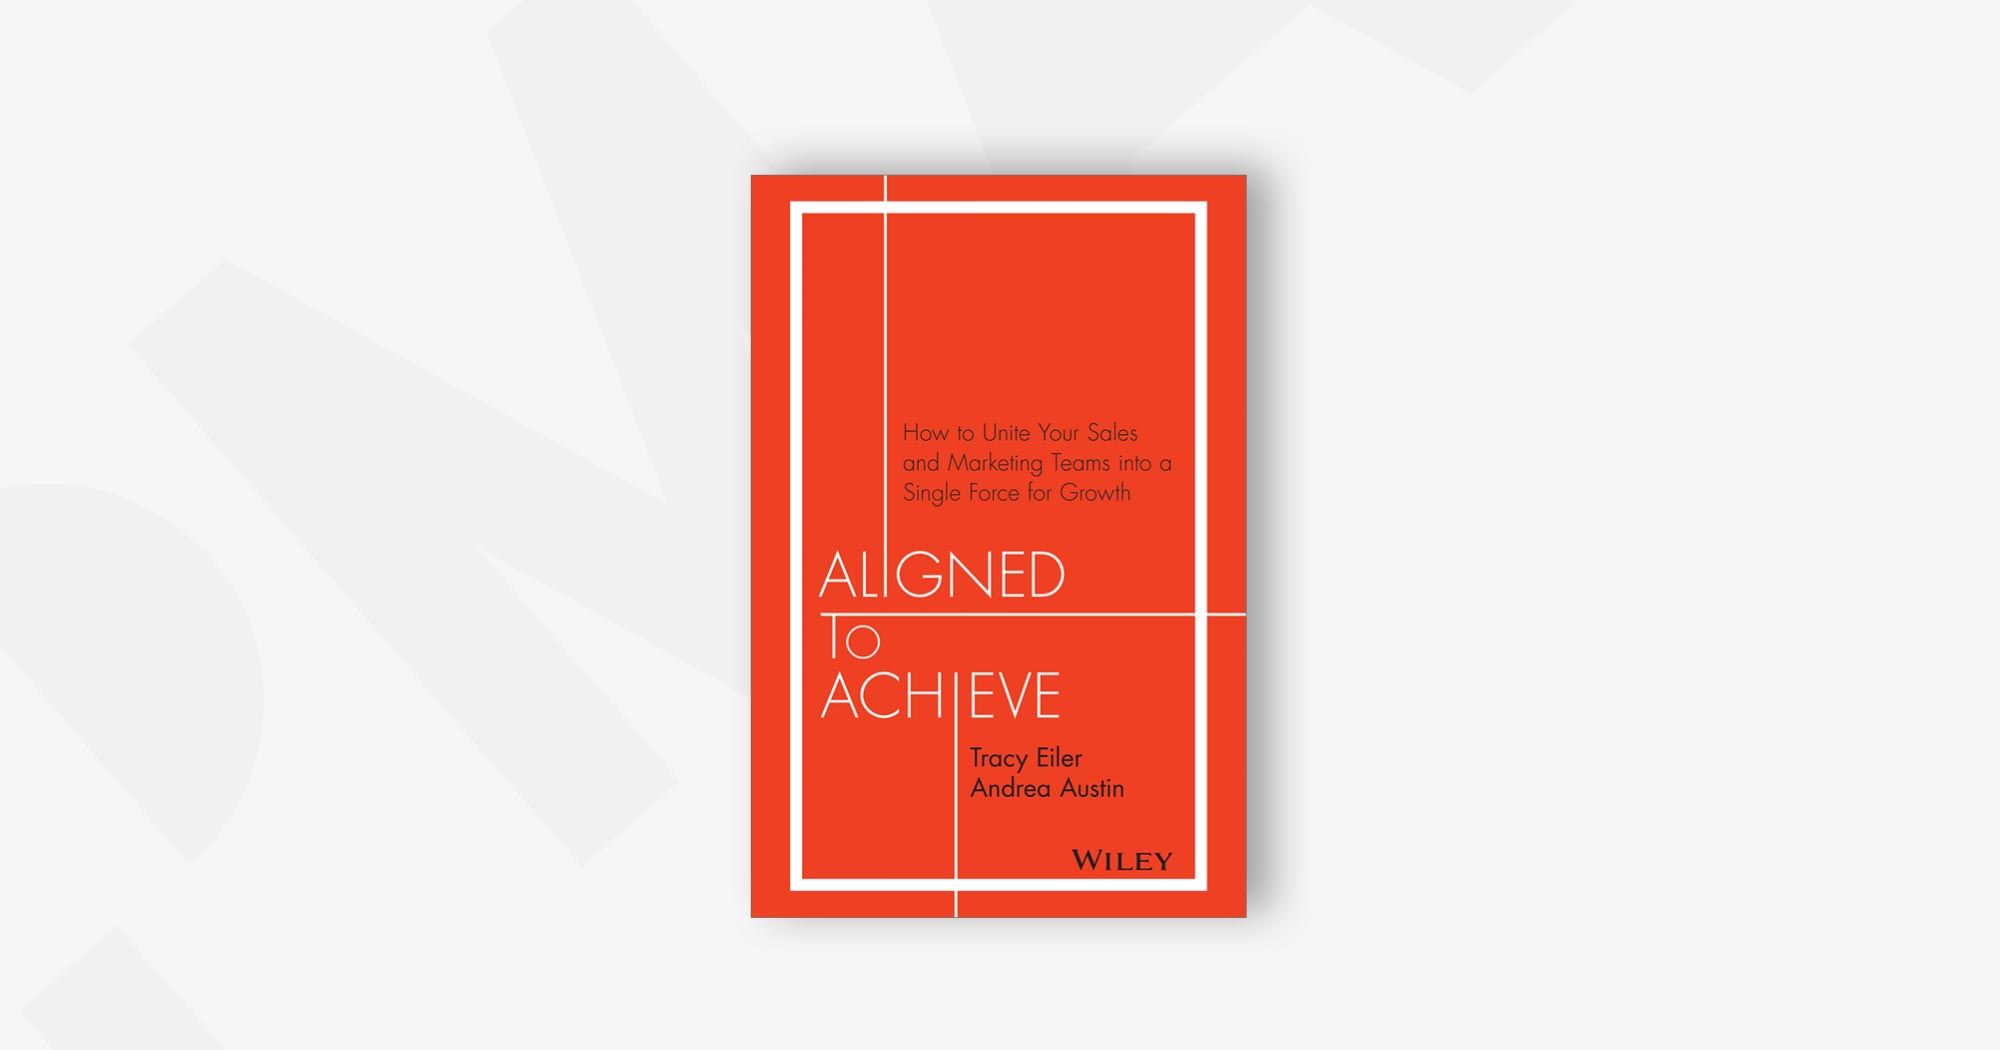 Aligned to Achieve: How to Unite Your Sales and Marketing Teams into a Single Force for Growth – Tracy Eiler and Andrea Austin